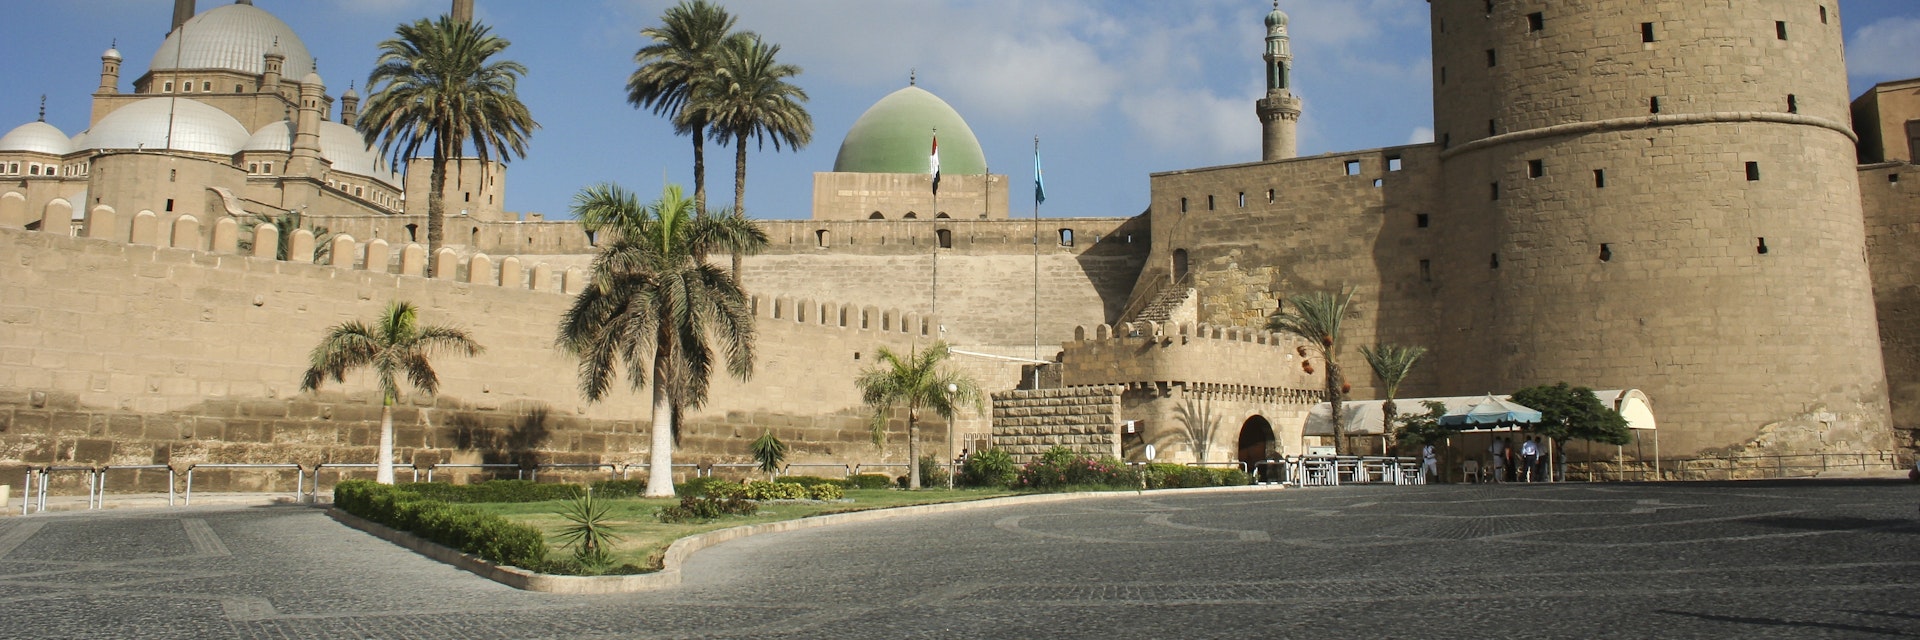 The Cairo Citadel with the Muhammad Ali Mosque